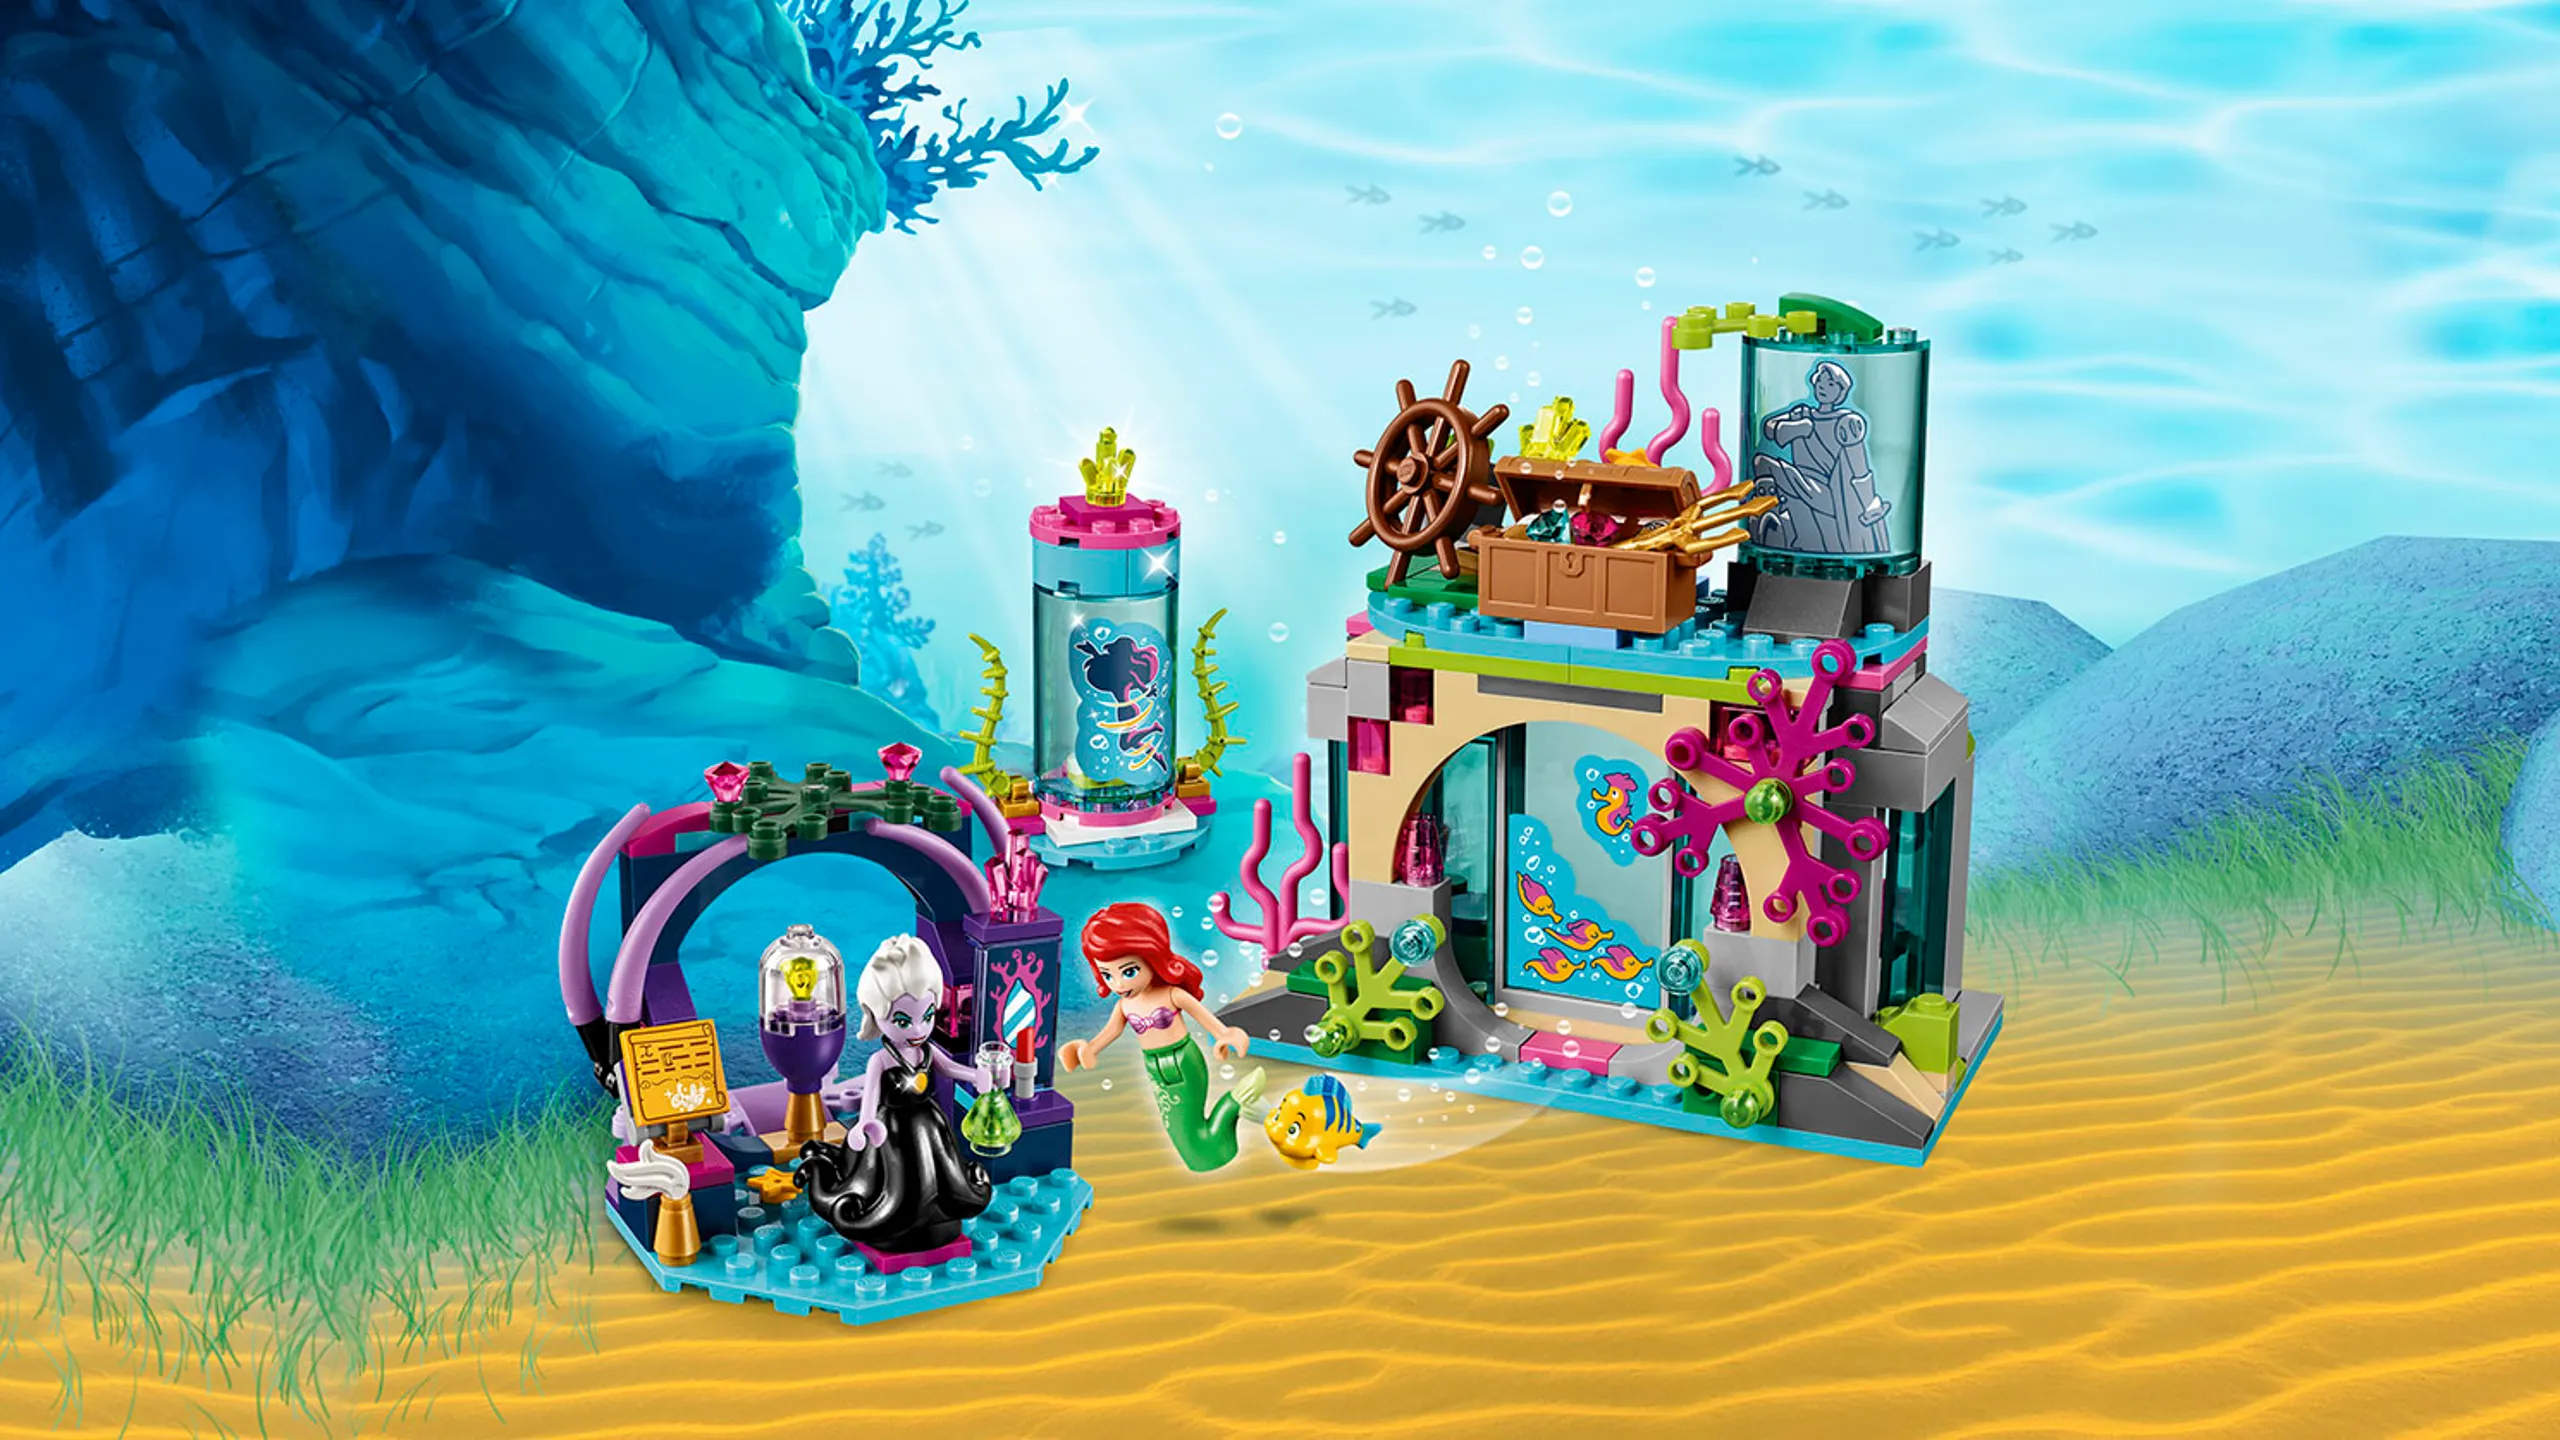 LEGO Disney - 41145 Ariel and the Magic Spell - Explore Ariel's secret cave with her treasures and visit the sea witch Ursula in her Grotto.